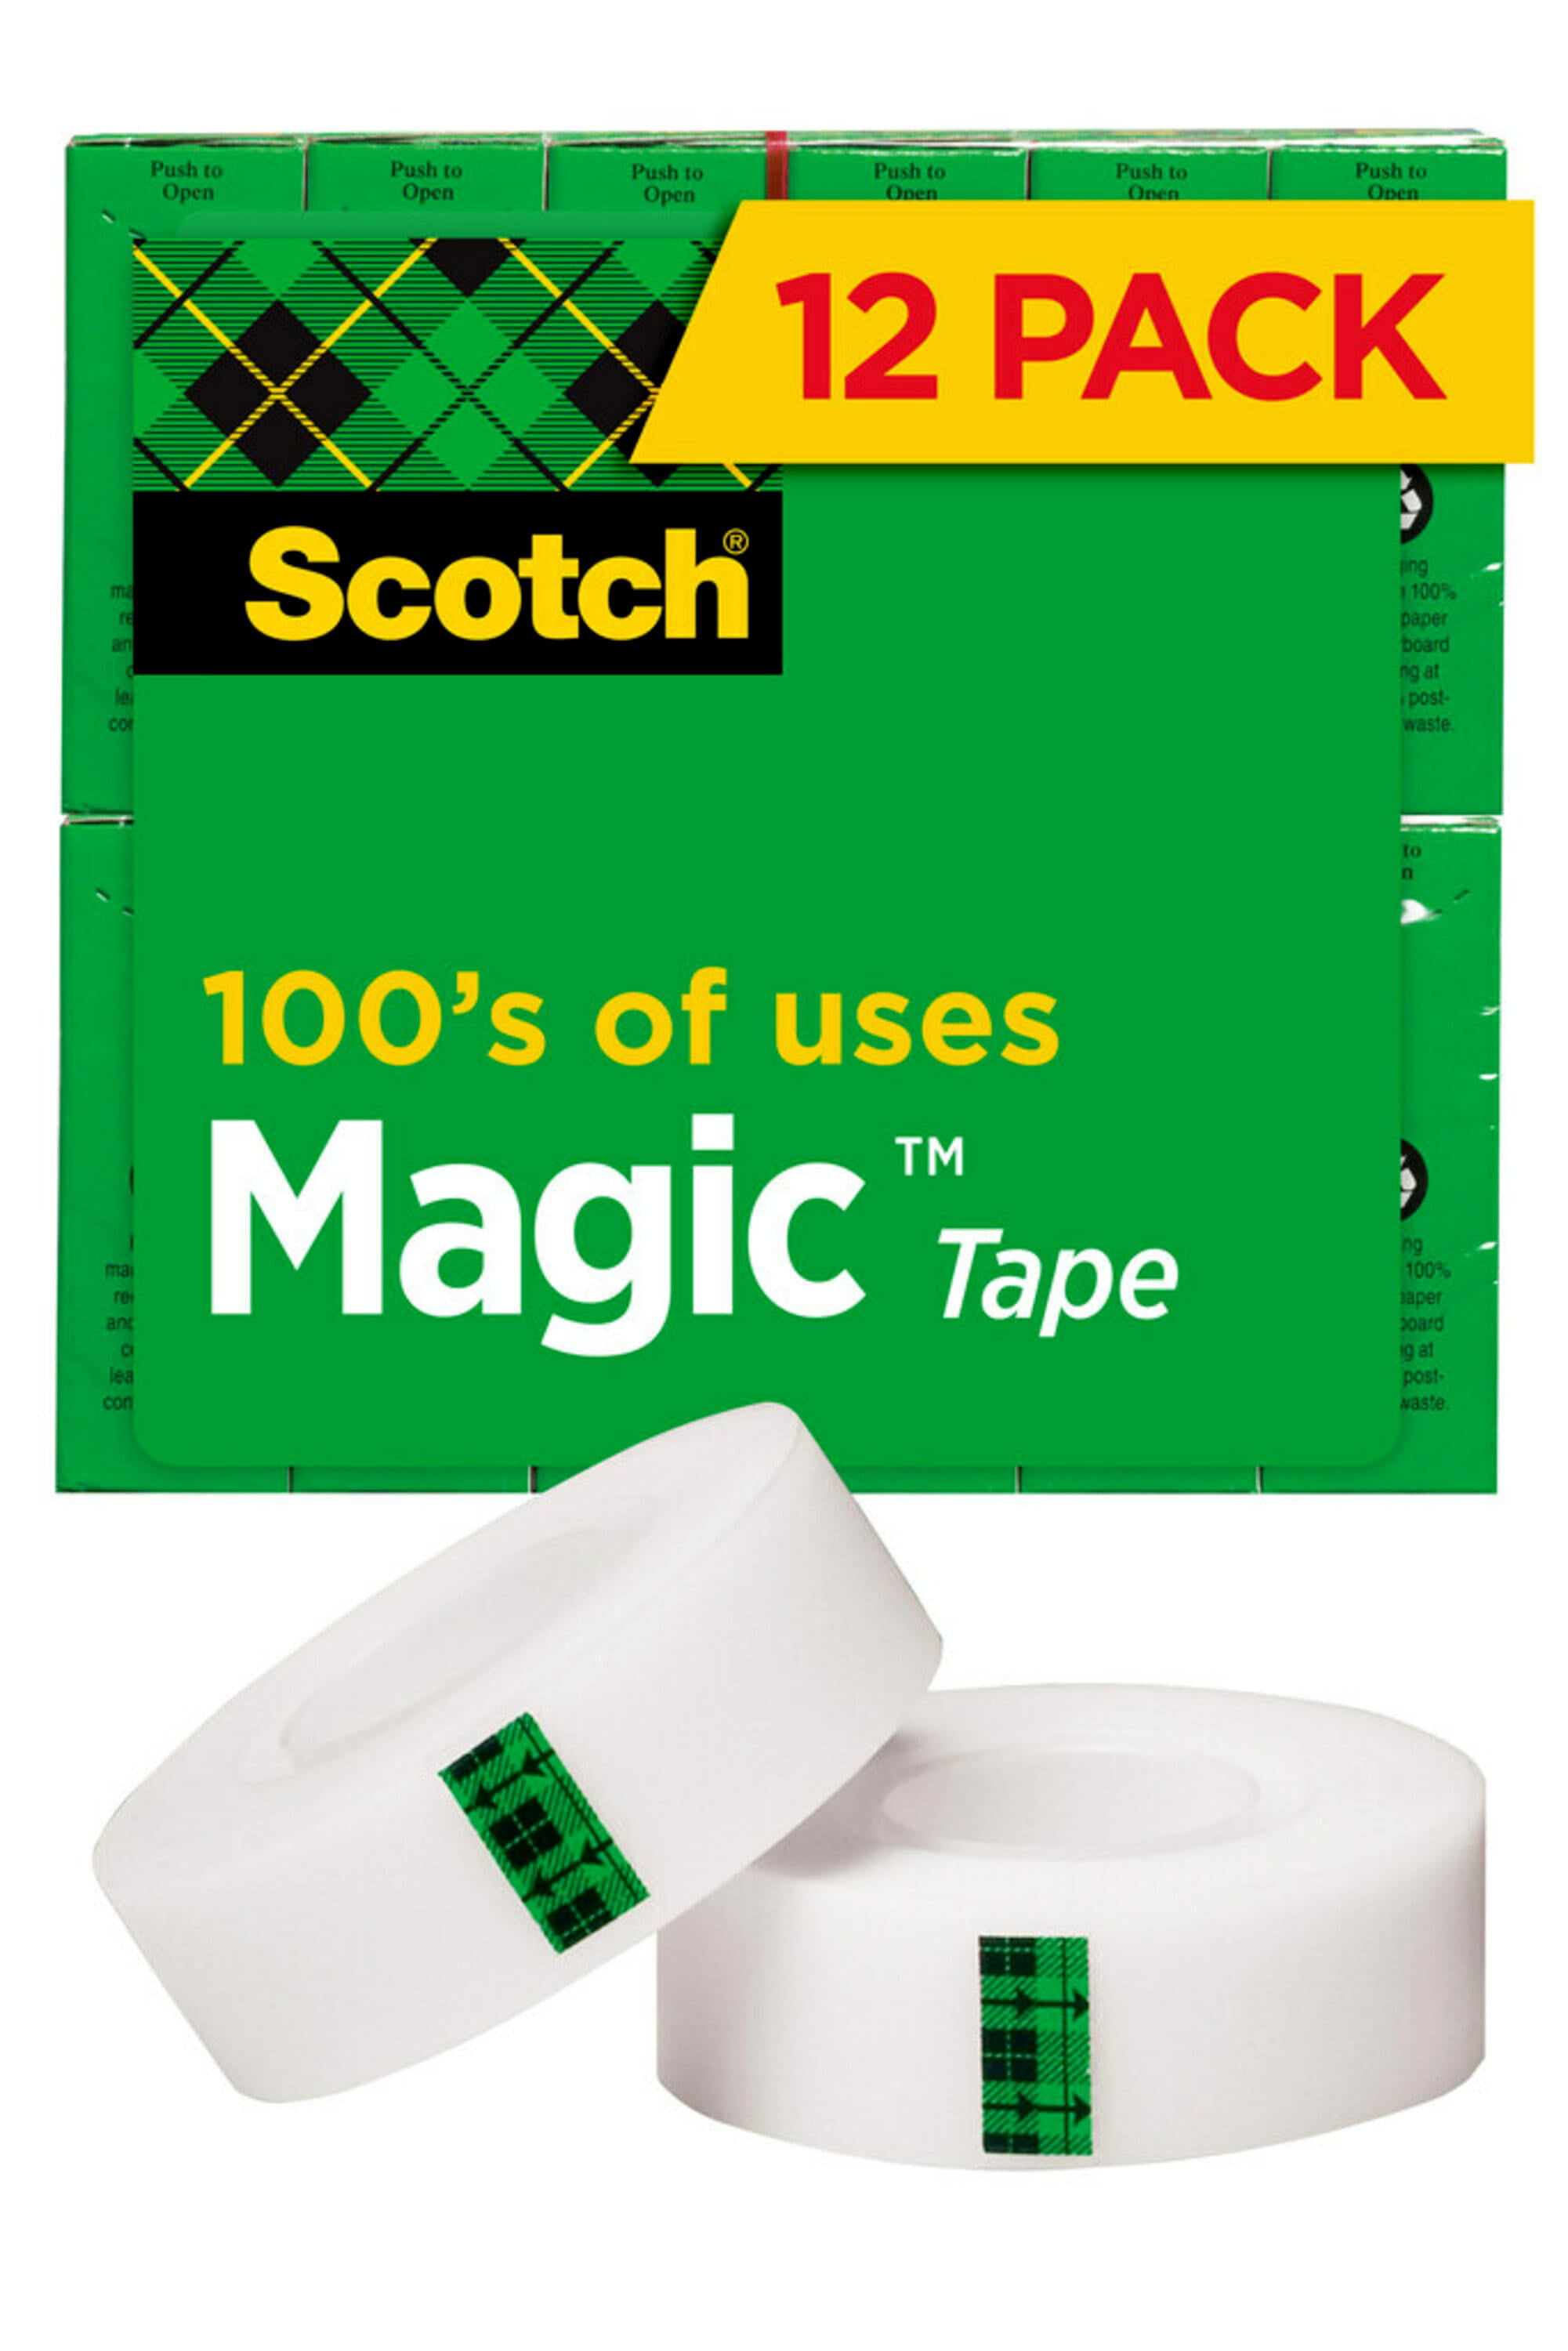 3" CORE 811 NEW 811 72YD 12 PACK SCOTCH REMOVABLE MAGIC TAPE 1/2"x2592" 